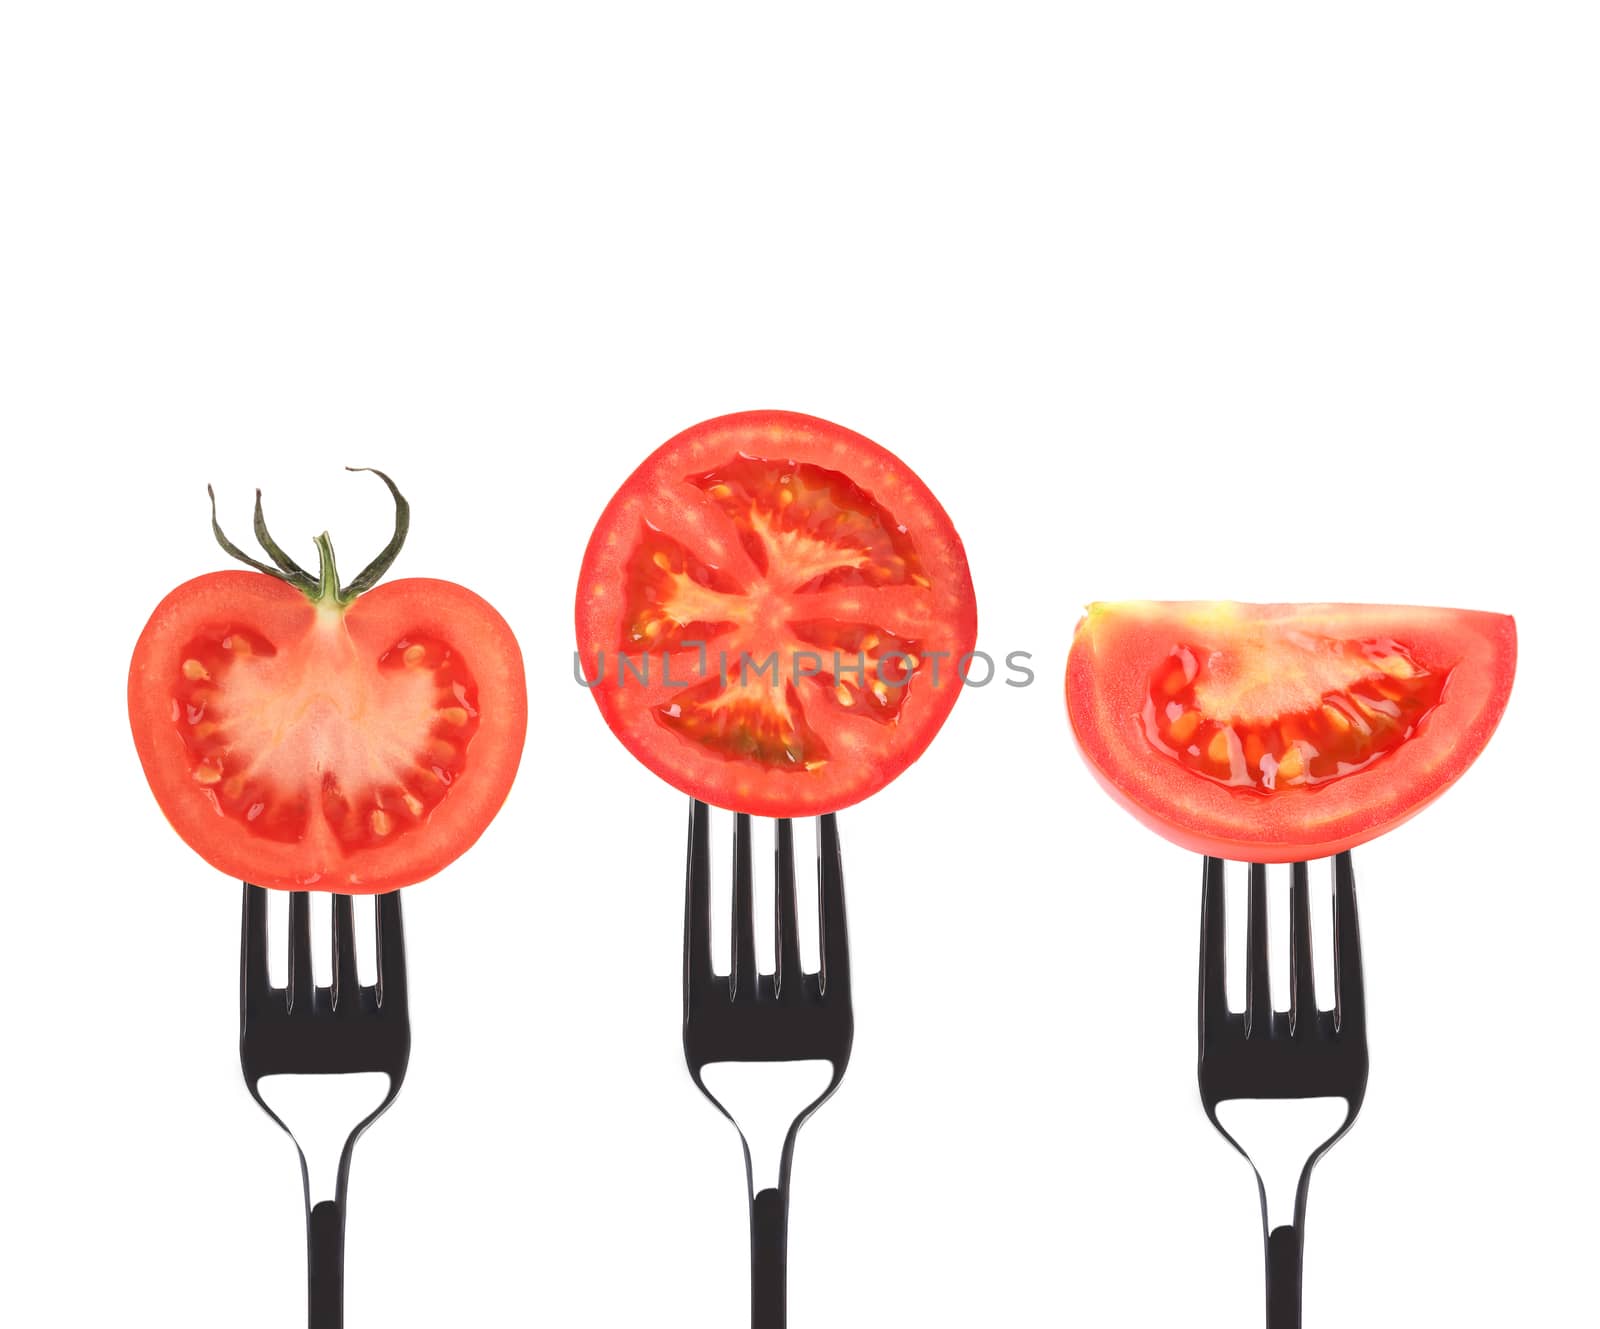 Tomato slices on forks. Isolated on a white background.